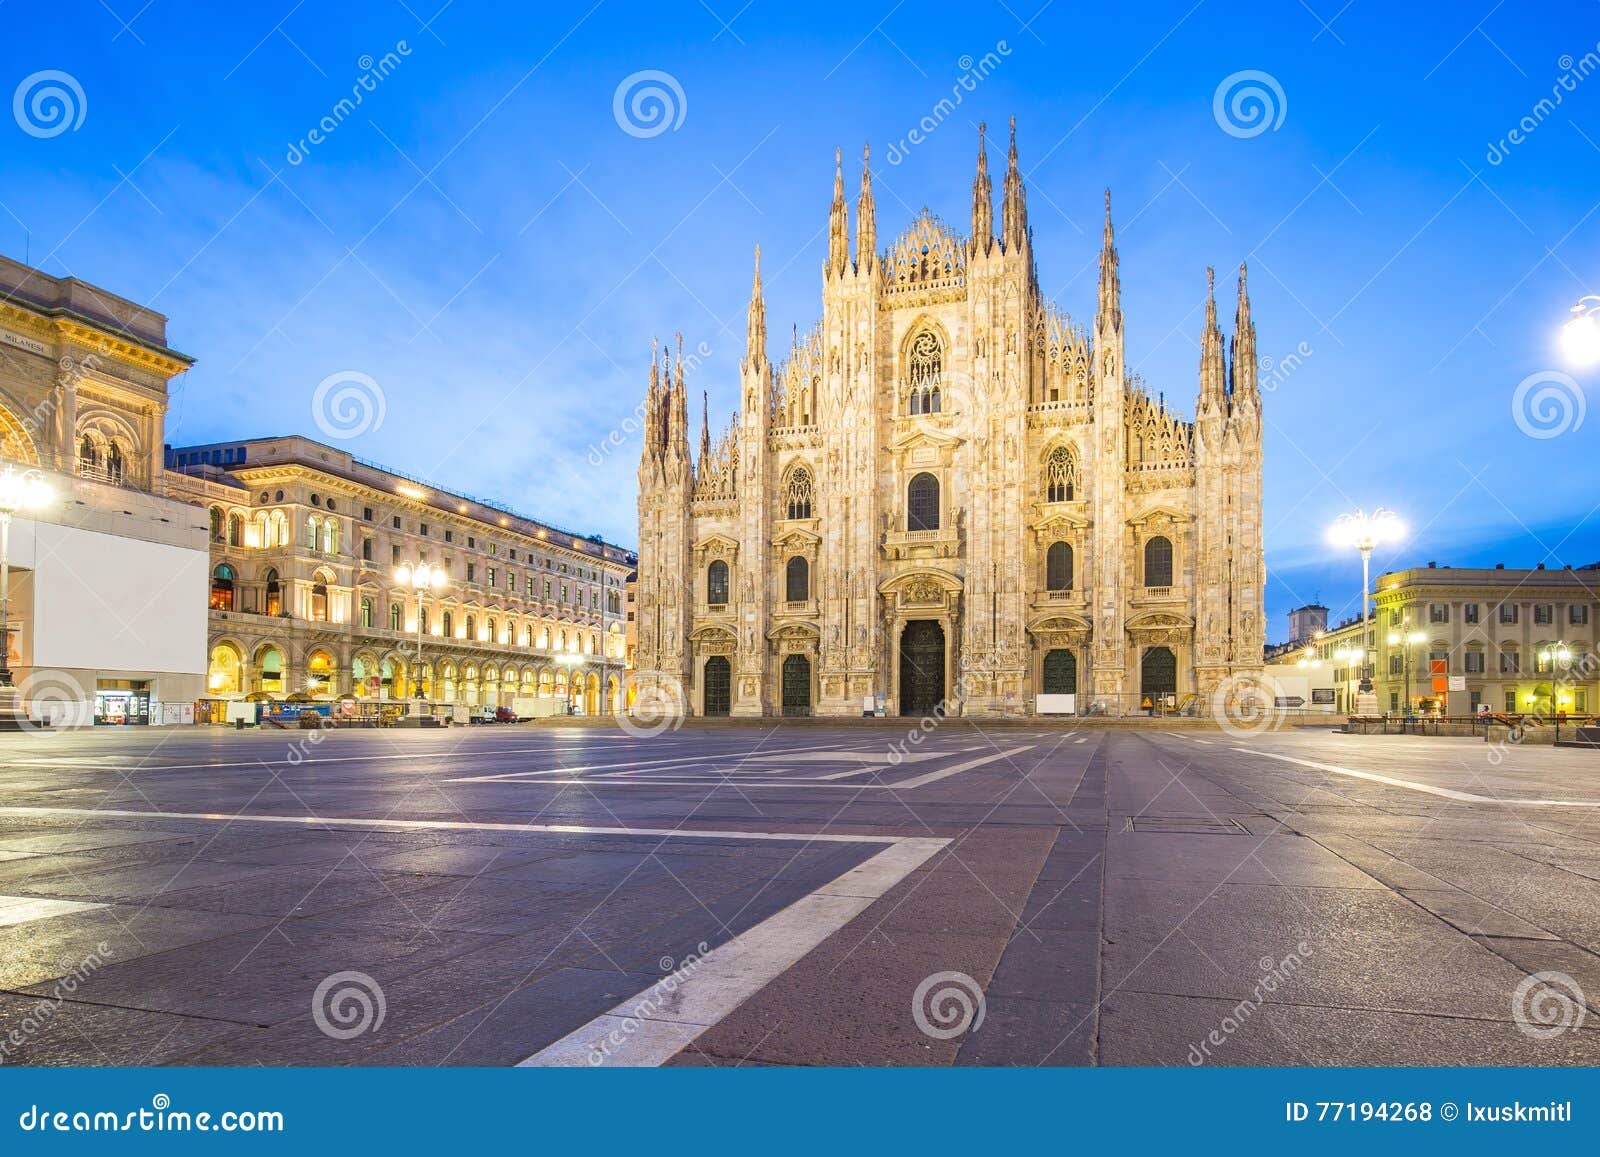 the duomo of milan cathedral in milano, italy